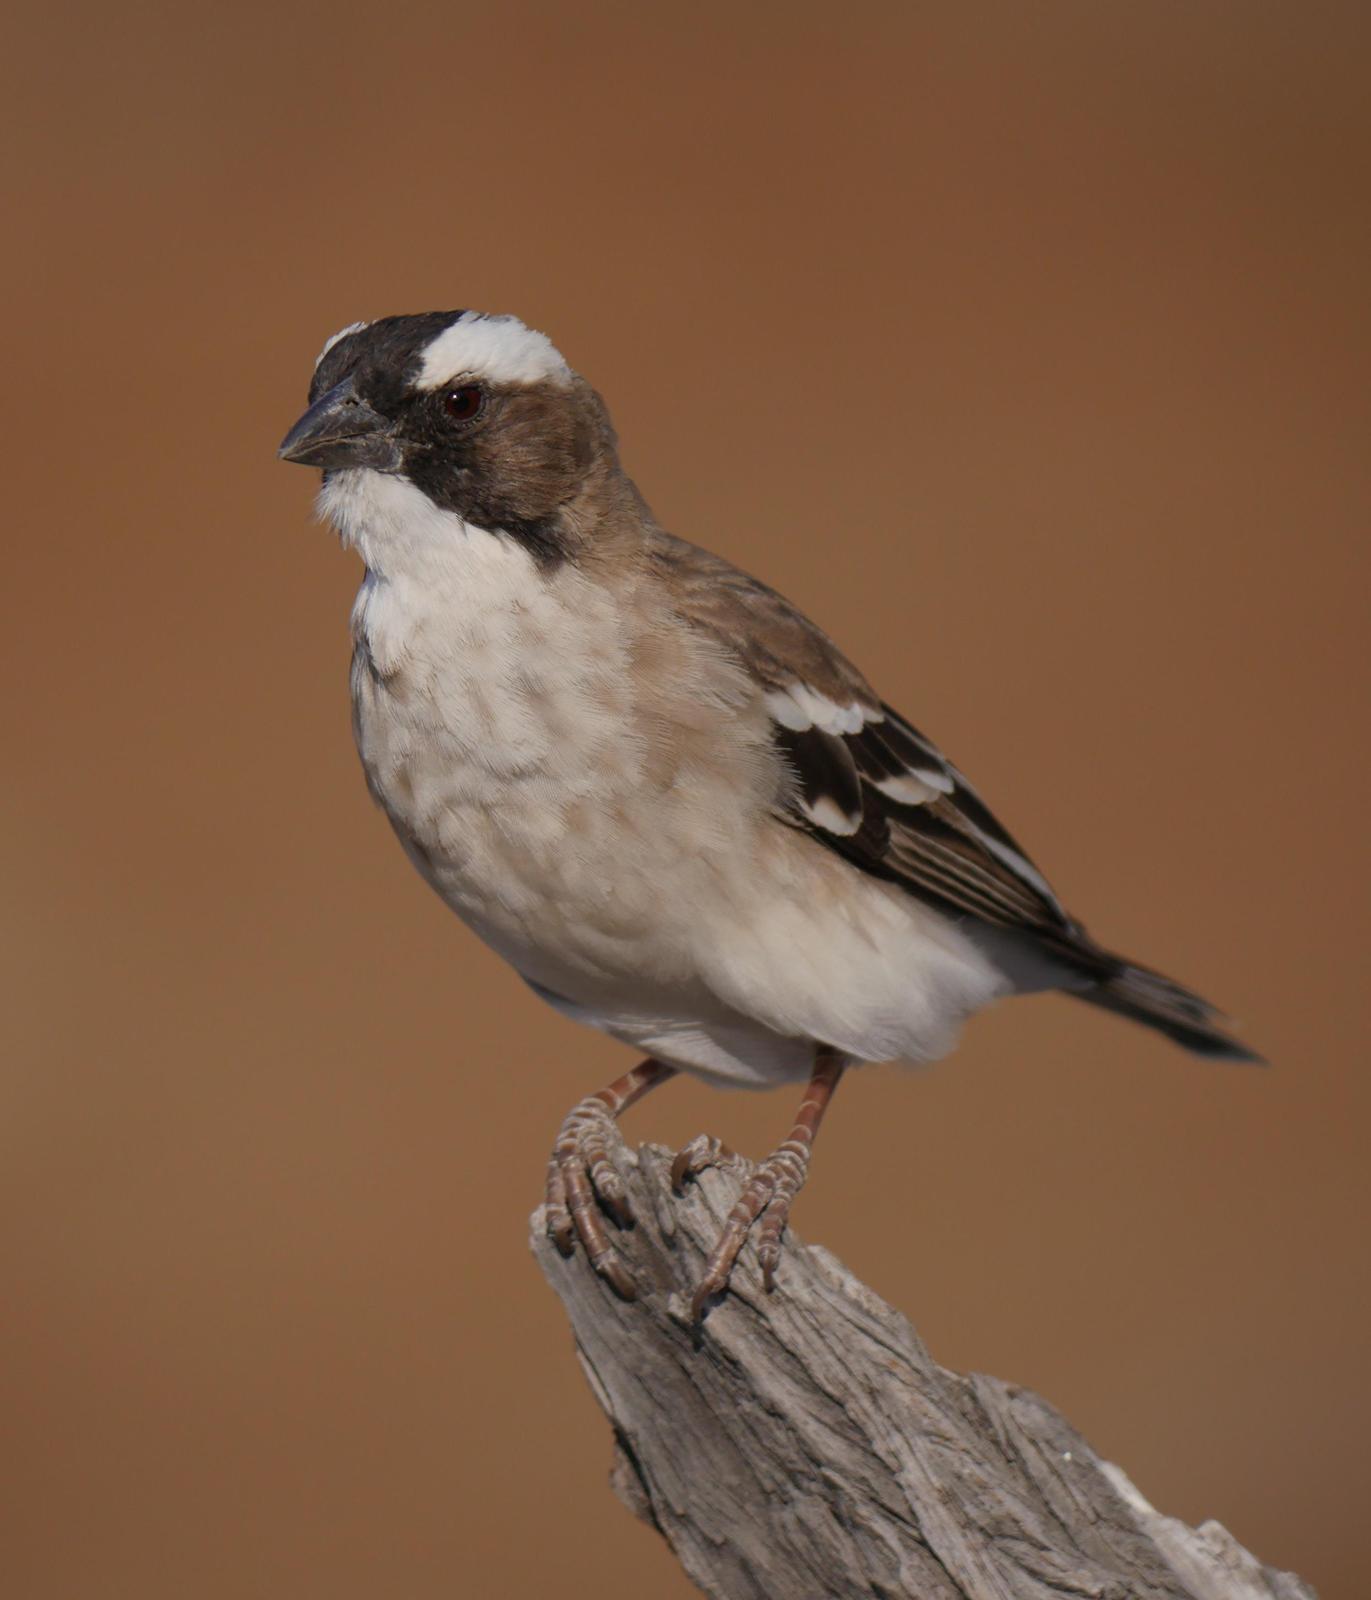 White-browed Sparrow-Weaver Photo by Peter Lowe